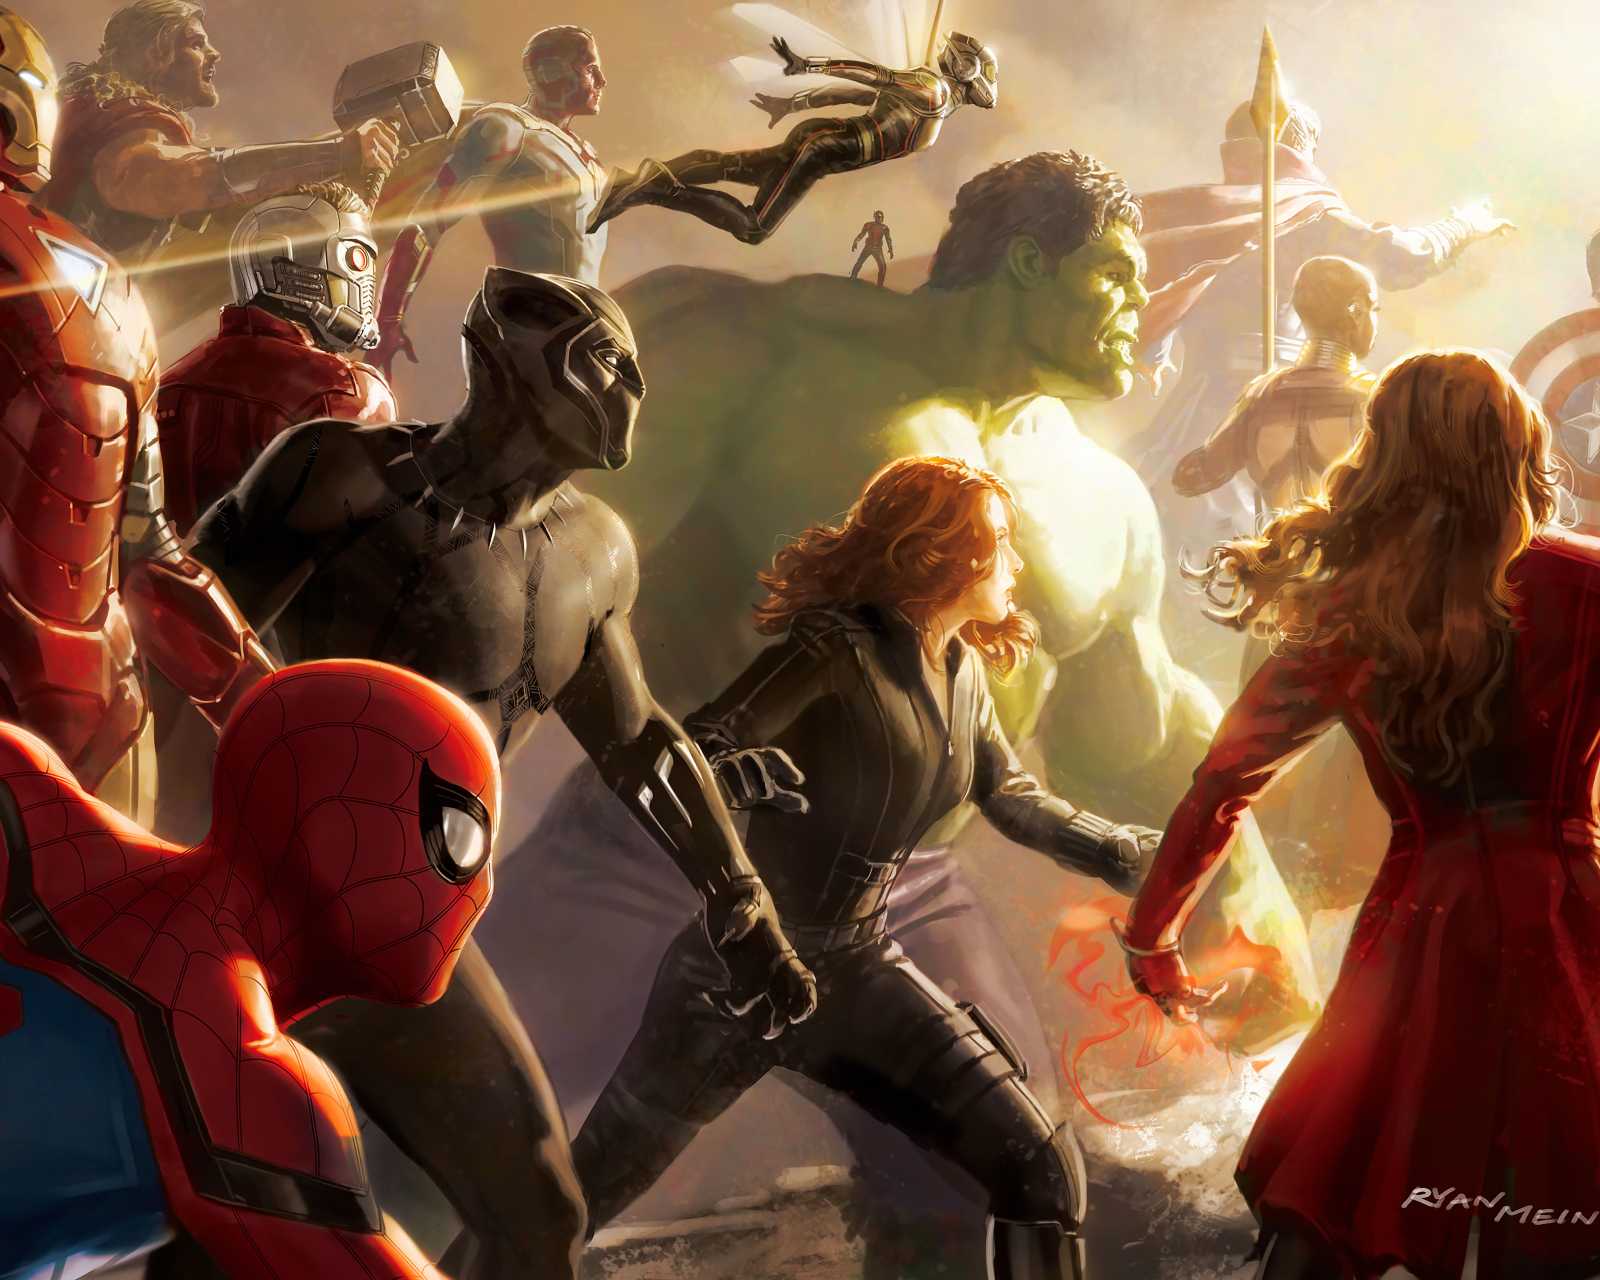 Download mobile wallpaper Spider Man, Hulk, Iron Man, Movie, Wasp (Marvel Comics), Thor, Black Widow, Vision (Marvel Comics), The Avengers, Scarlet Witch, Doctor Strange, Star Lord, Ant Man, Black Panther (Movie), Avengers: Infinity War, Okoye (Marvel Comics) for free.